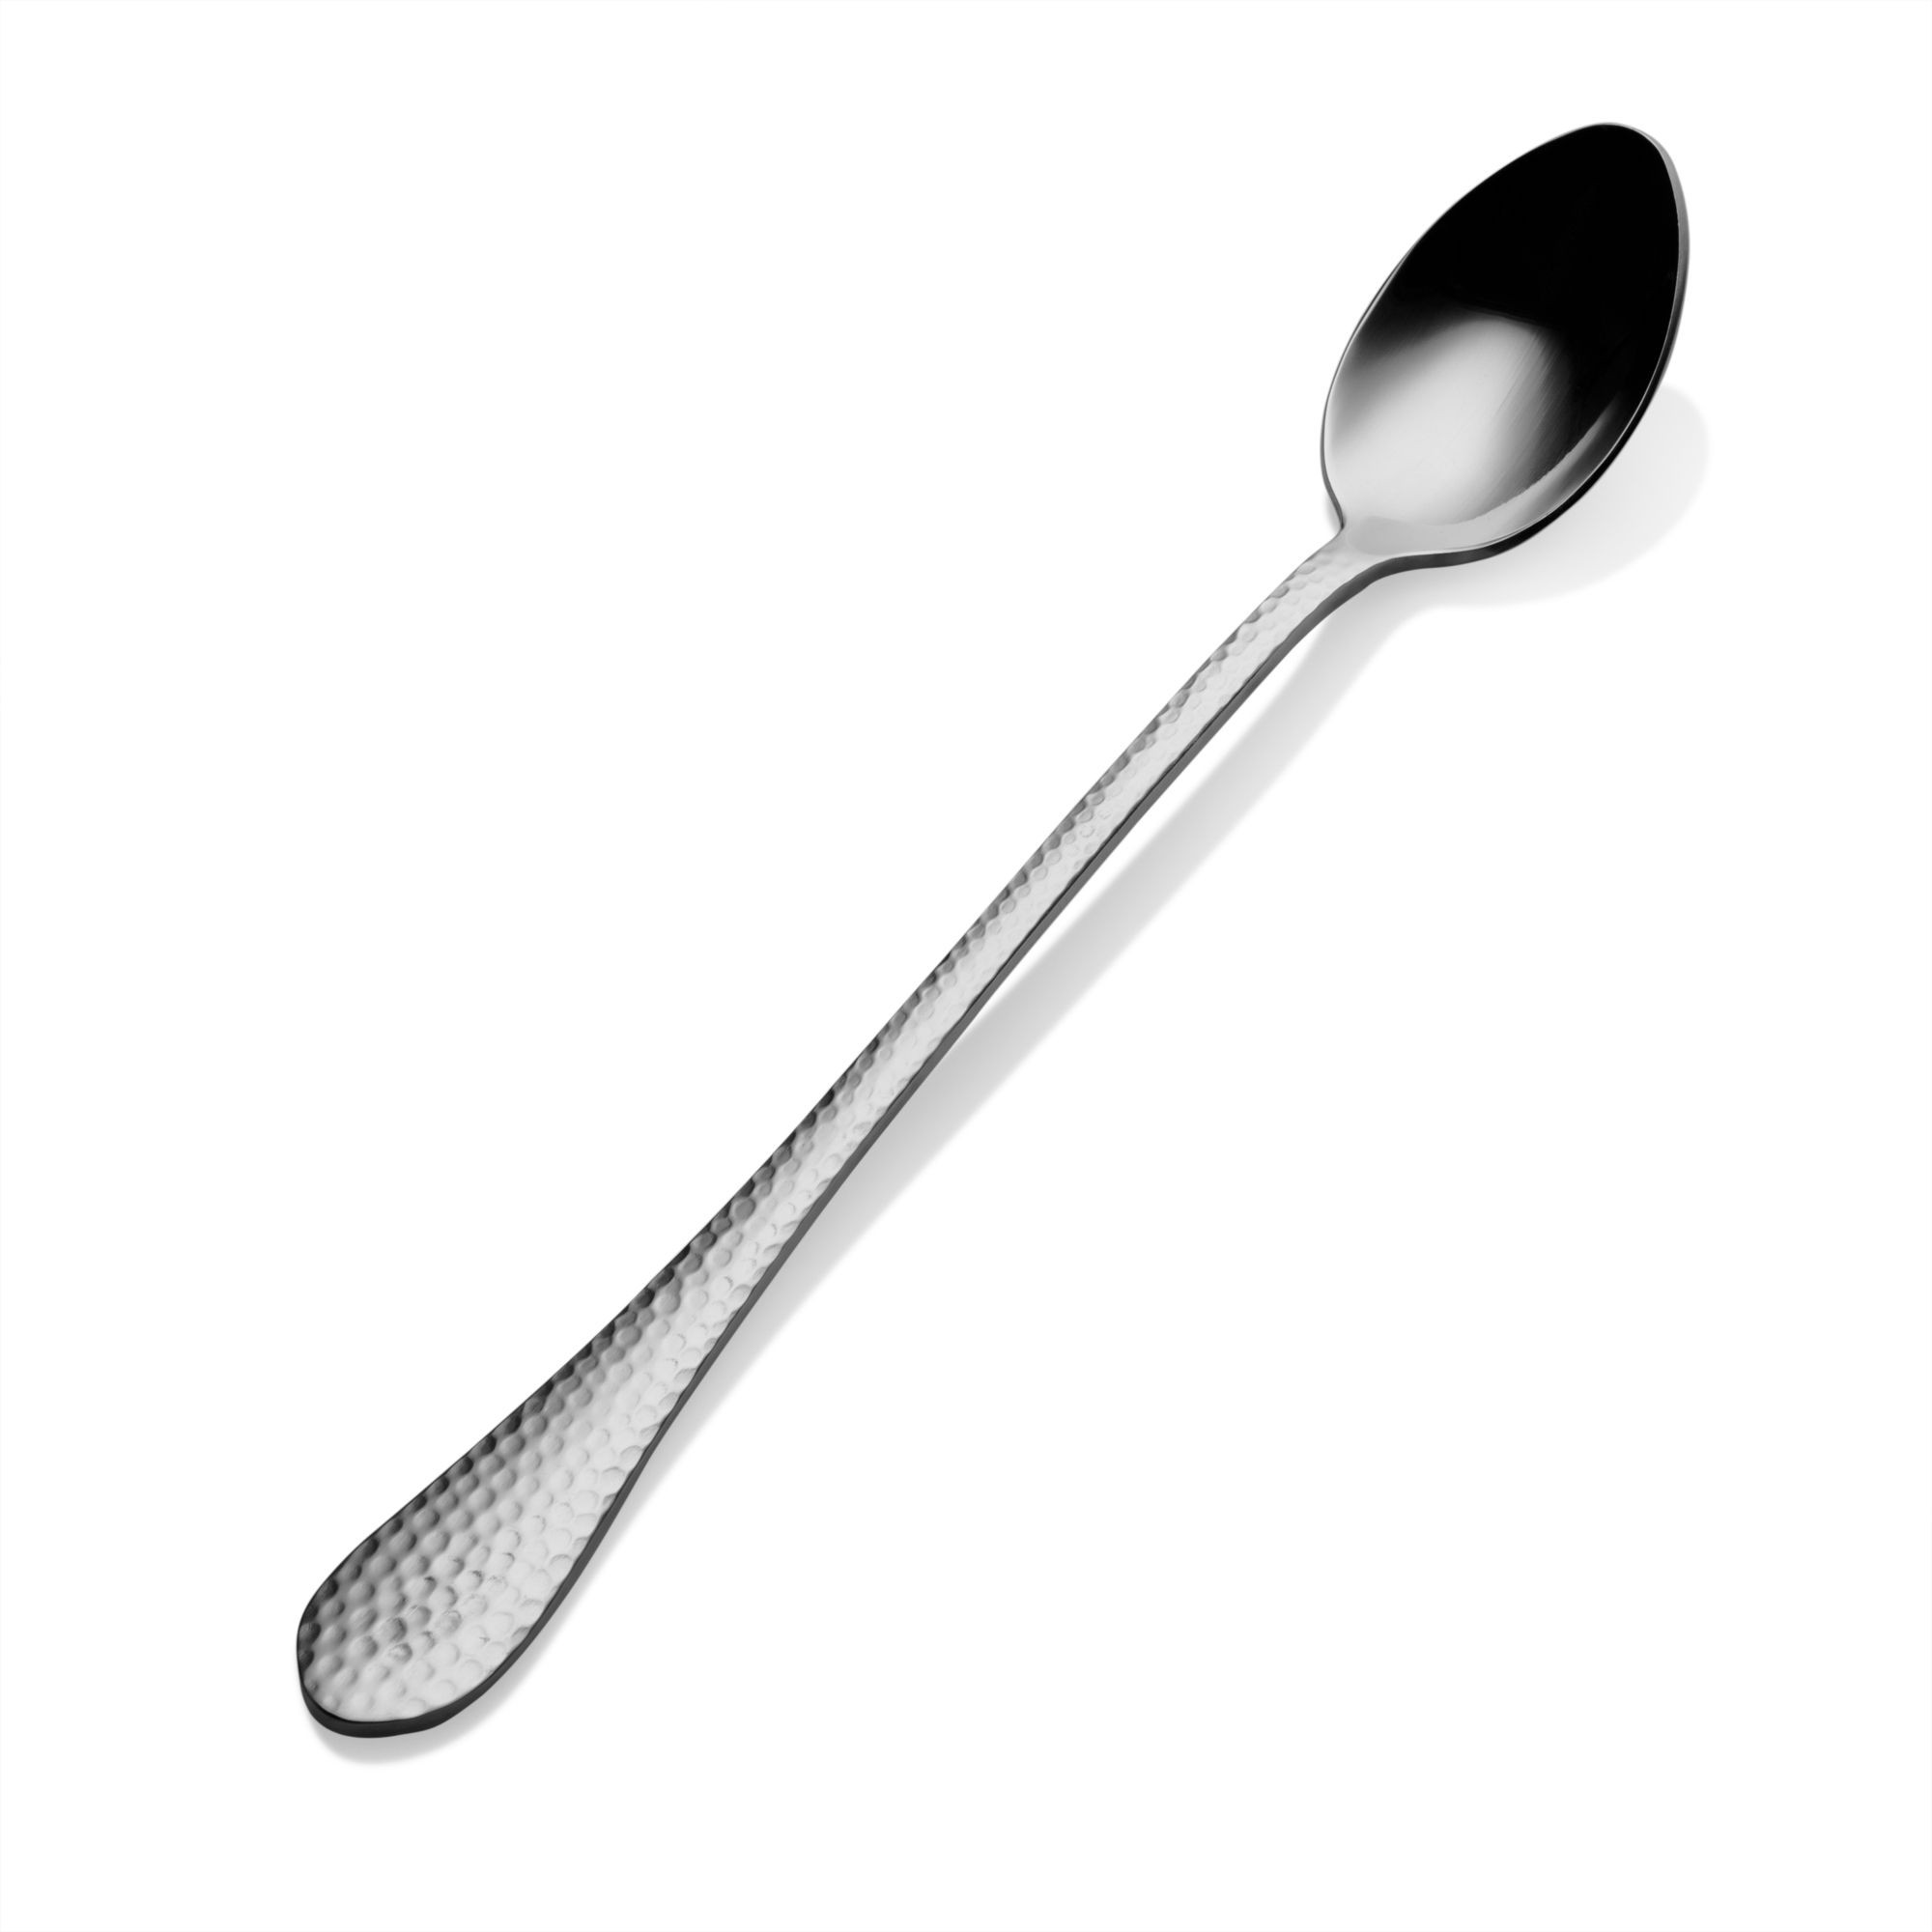 Bon Chef S1202 Reflections 18/8 Stainless Steel Iced Tea Spoon